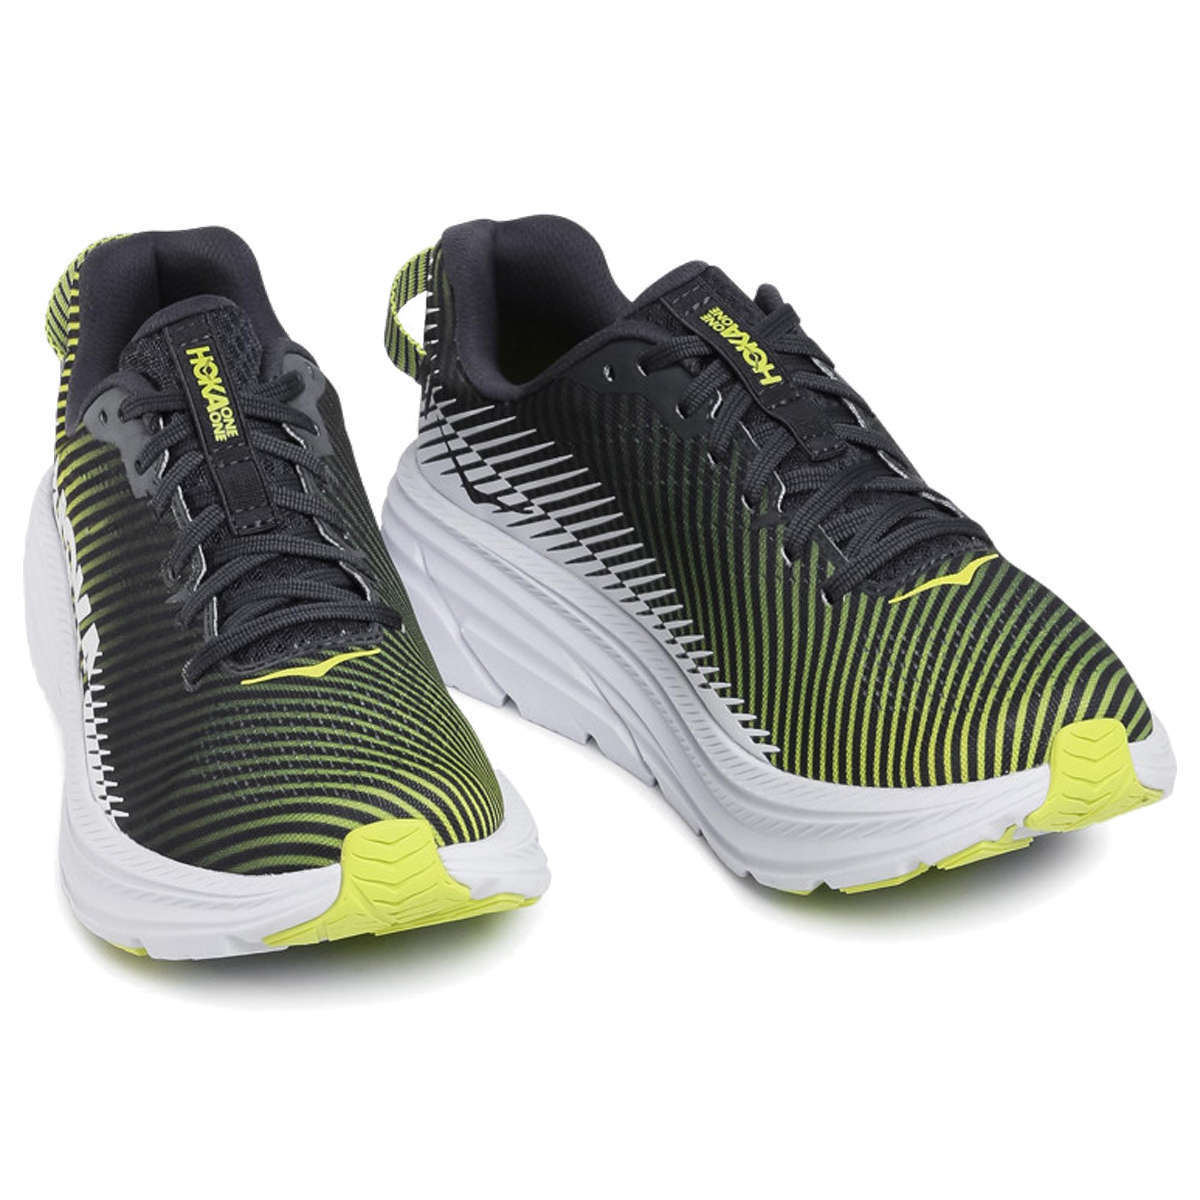 Hoka One One Rincon 2 Mesh Men's Low-Top Road Running Trainers#color_odyssey grey white